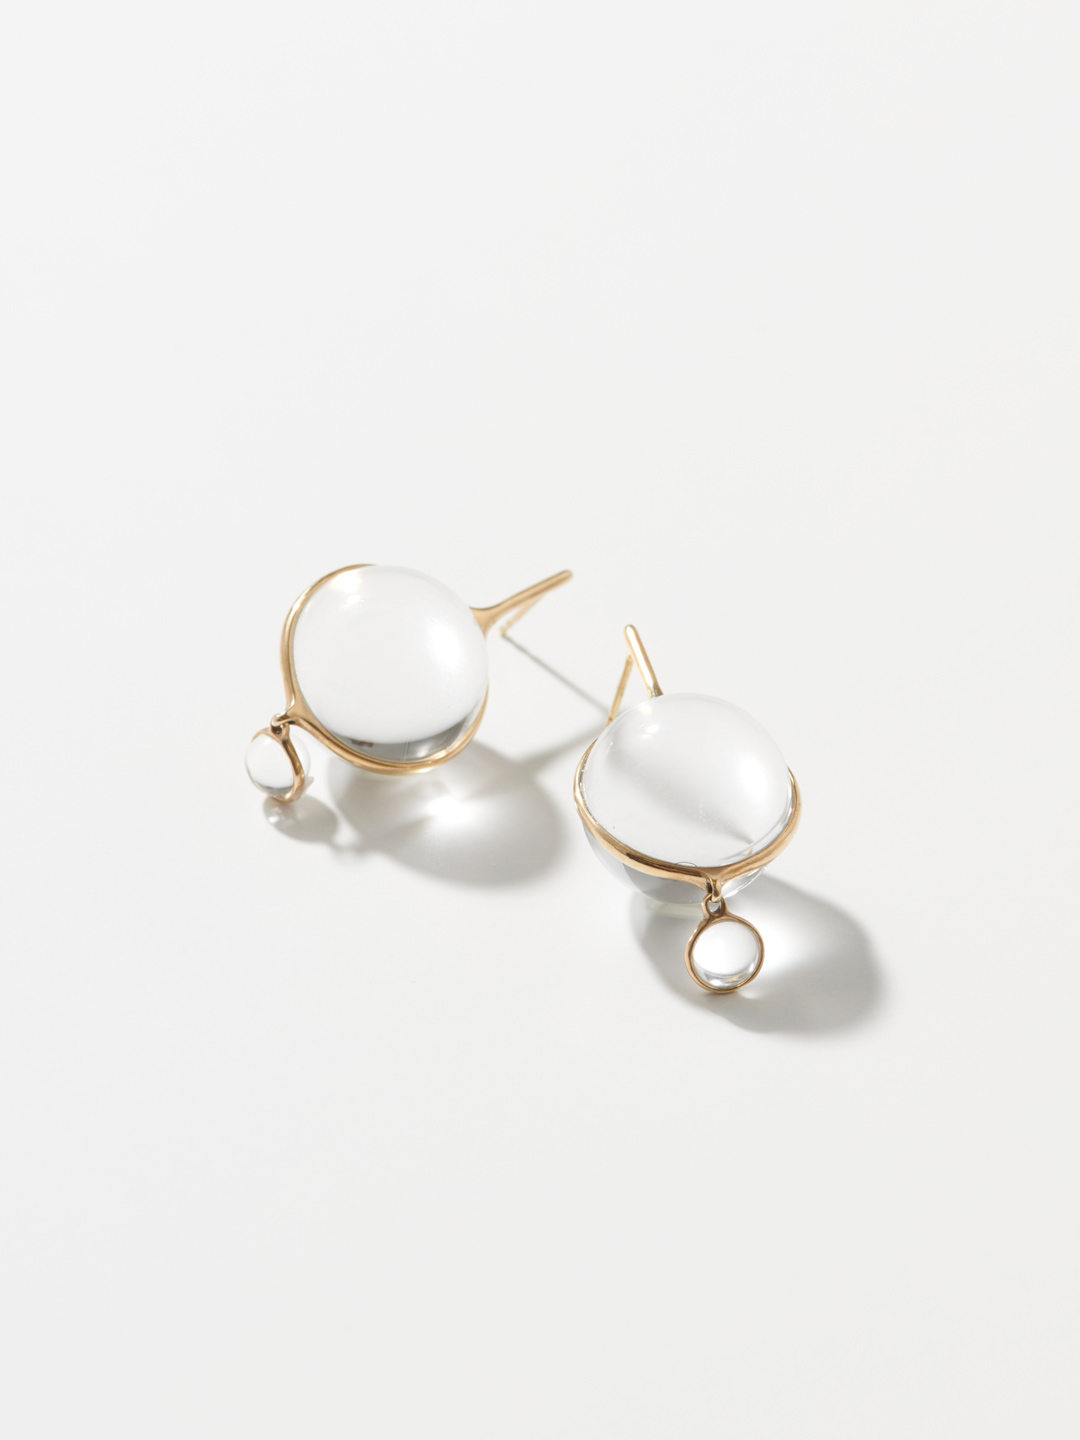 Lucent Drops Pierced Earrings - Yellow Gold